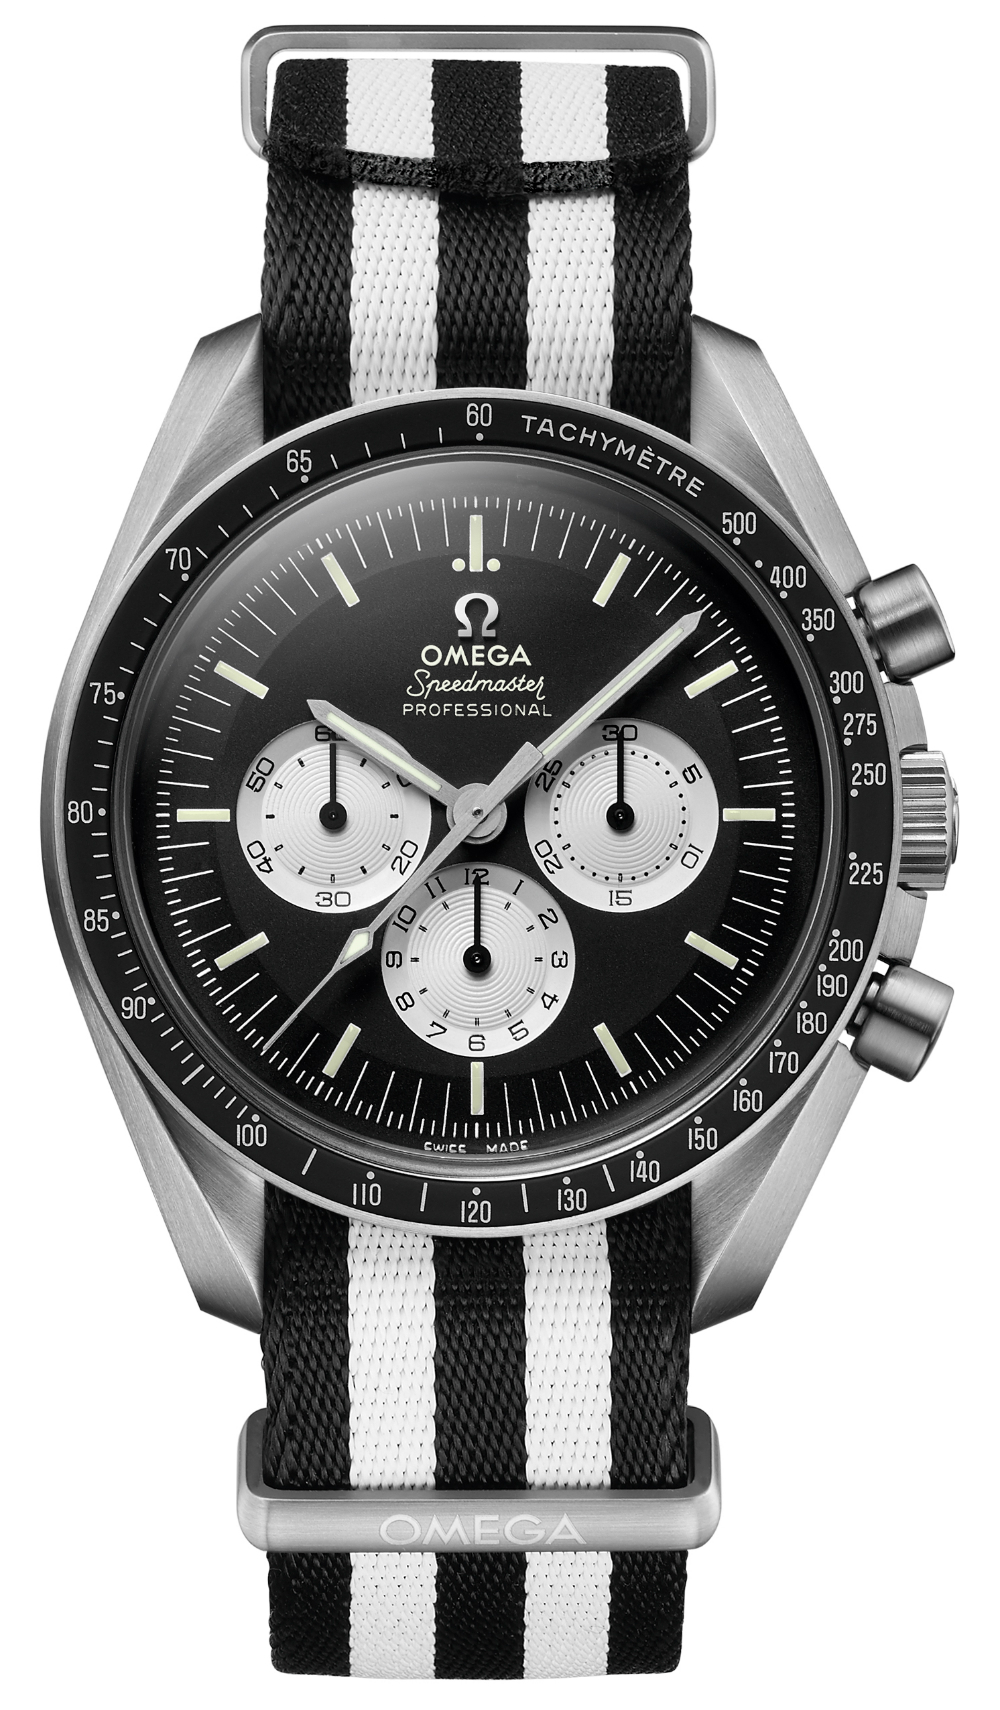 Omega Speedmaster ‘Speedy Tuesday’ Limited Edition Watch - Most Popular Luxury Watches Reviews ...